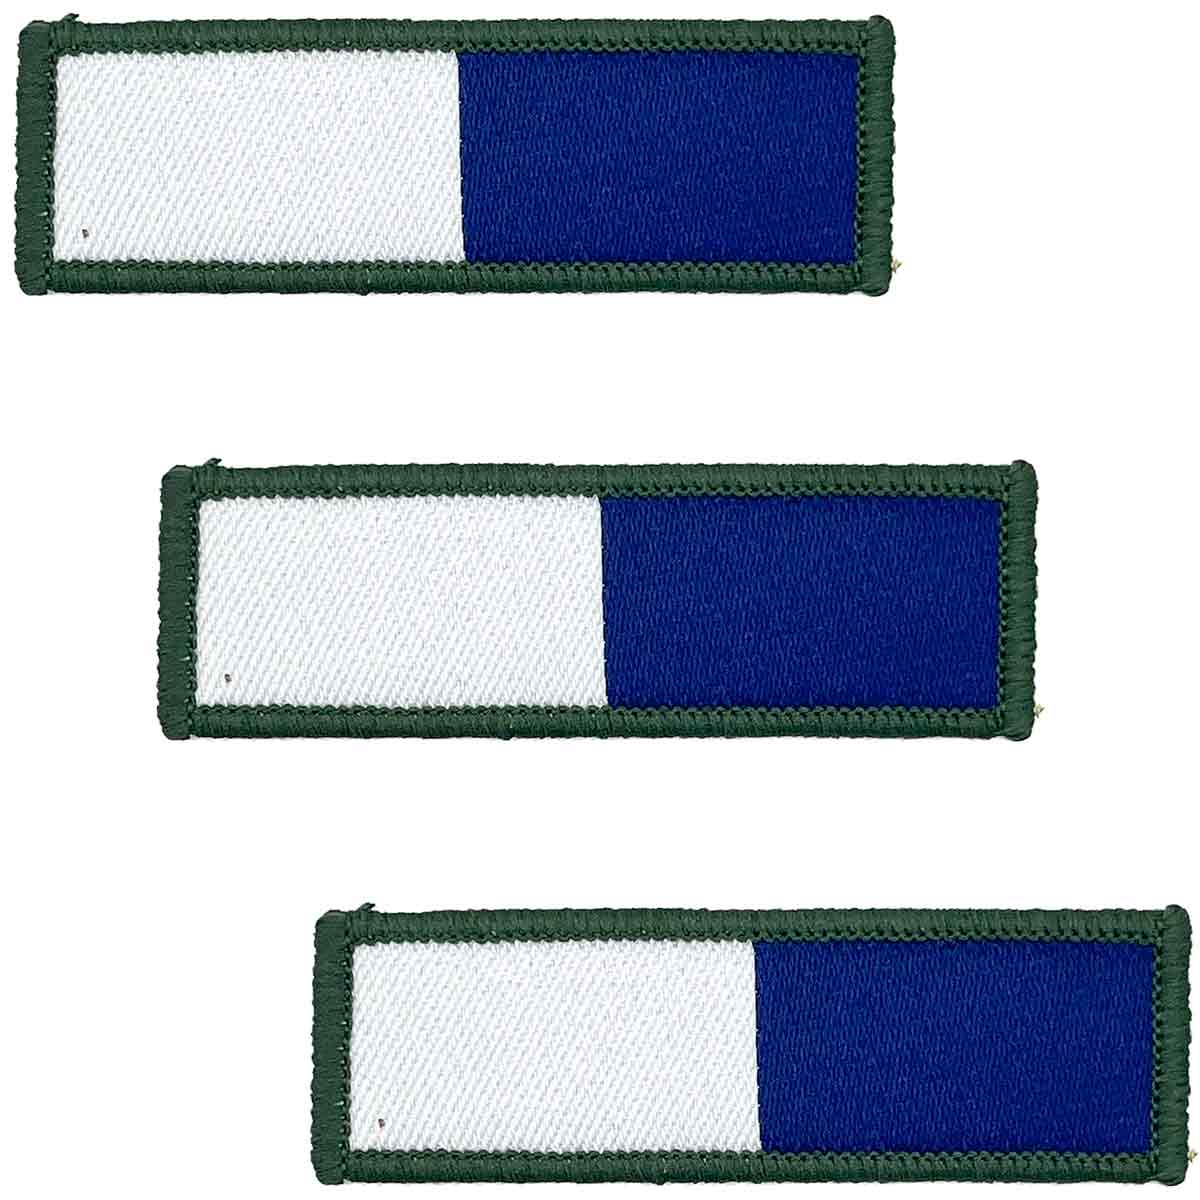 Royal Signals TRF - Iron or Sewn On Patch - John Bull Clothing